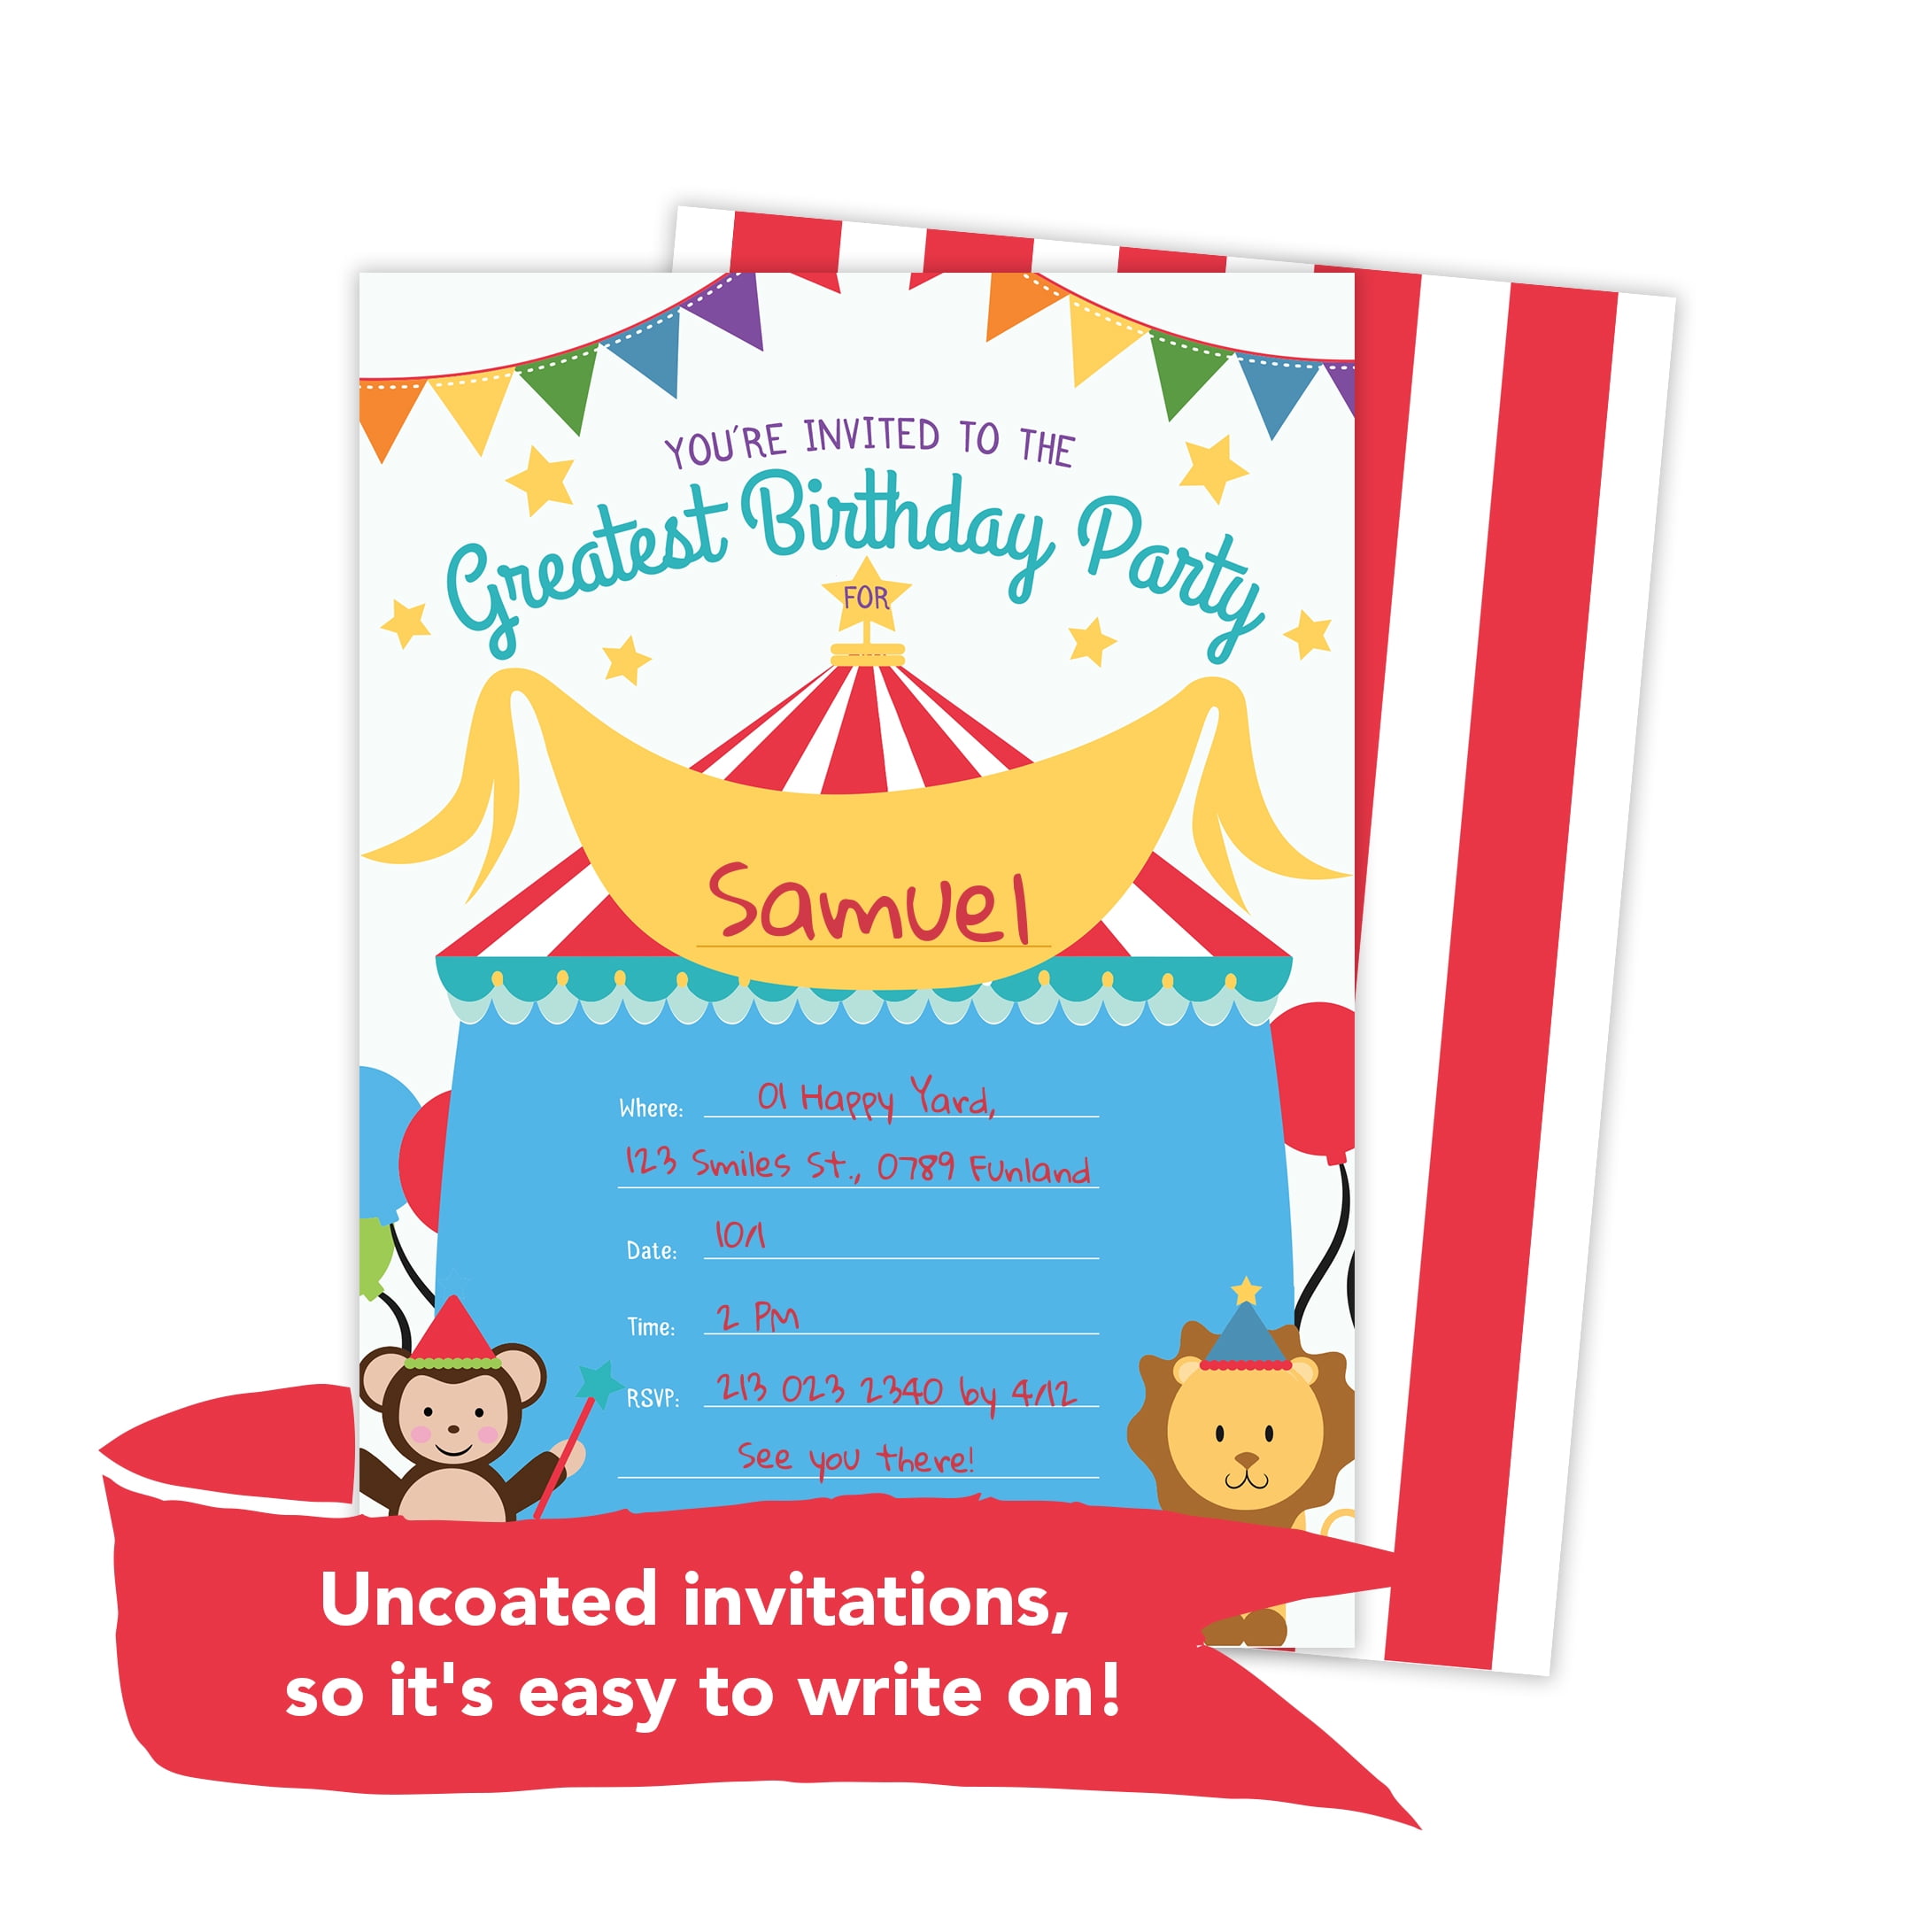 Combo Pack Movies 25 Invitations & 25 Thank You Cards Combo Pack Happy Birthday Invite Cards With Envelopes & Seal Stickers Boys Girls Kids Party Desert Cactus 